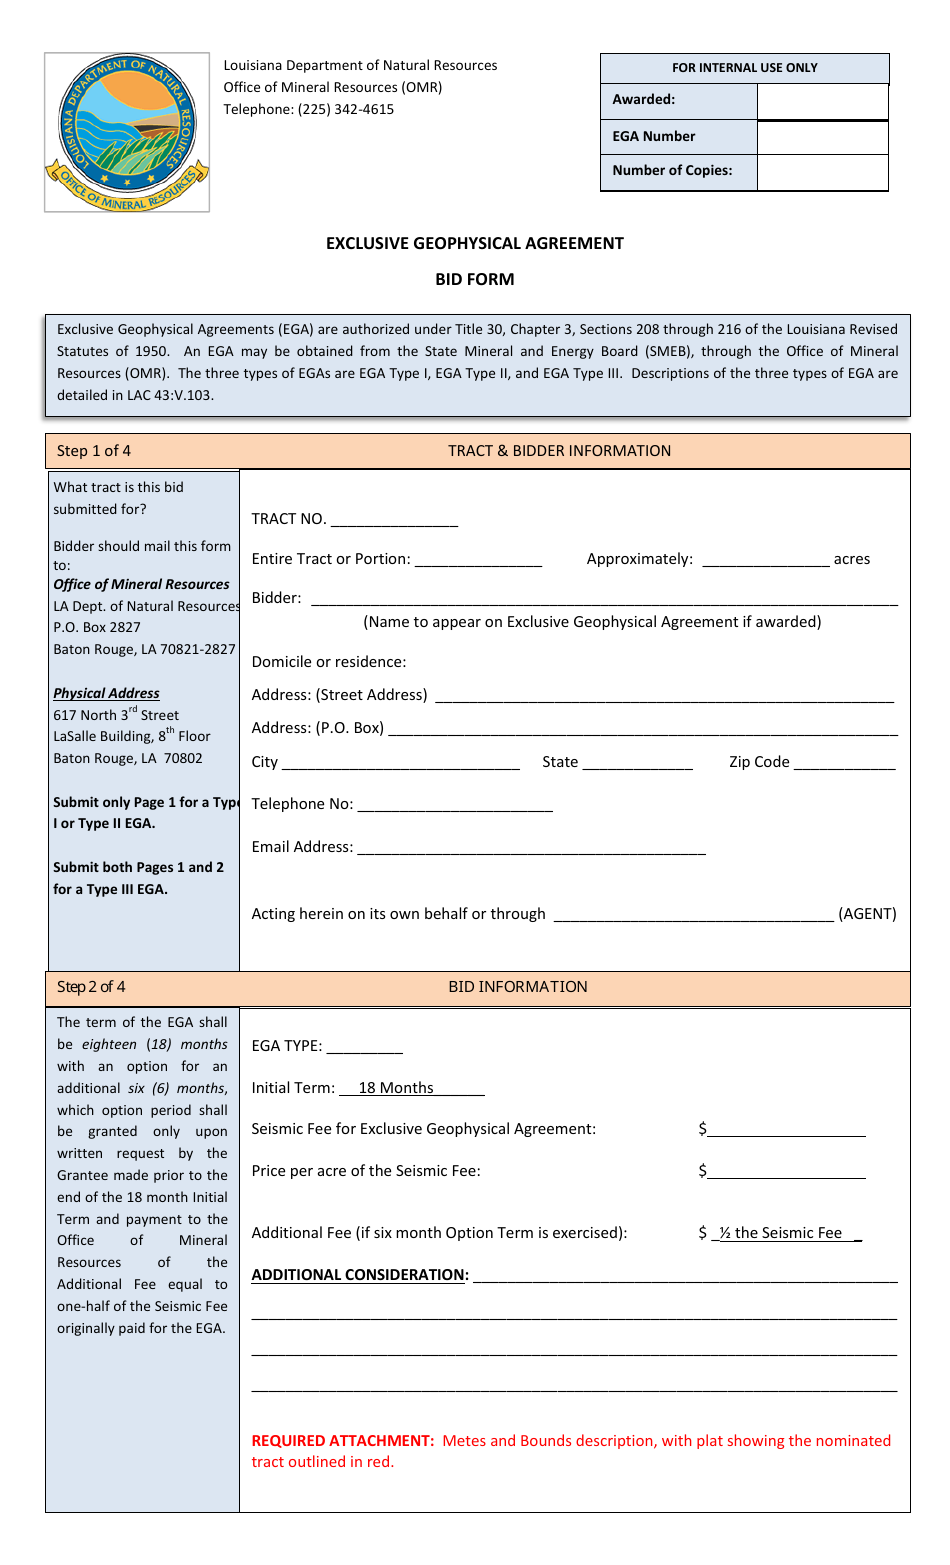 Exclusive Geophysical Agreement - Bid Form - Louisiana, Page 1